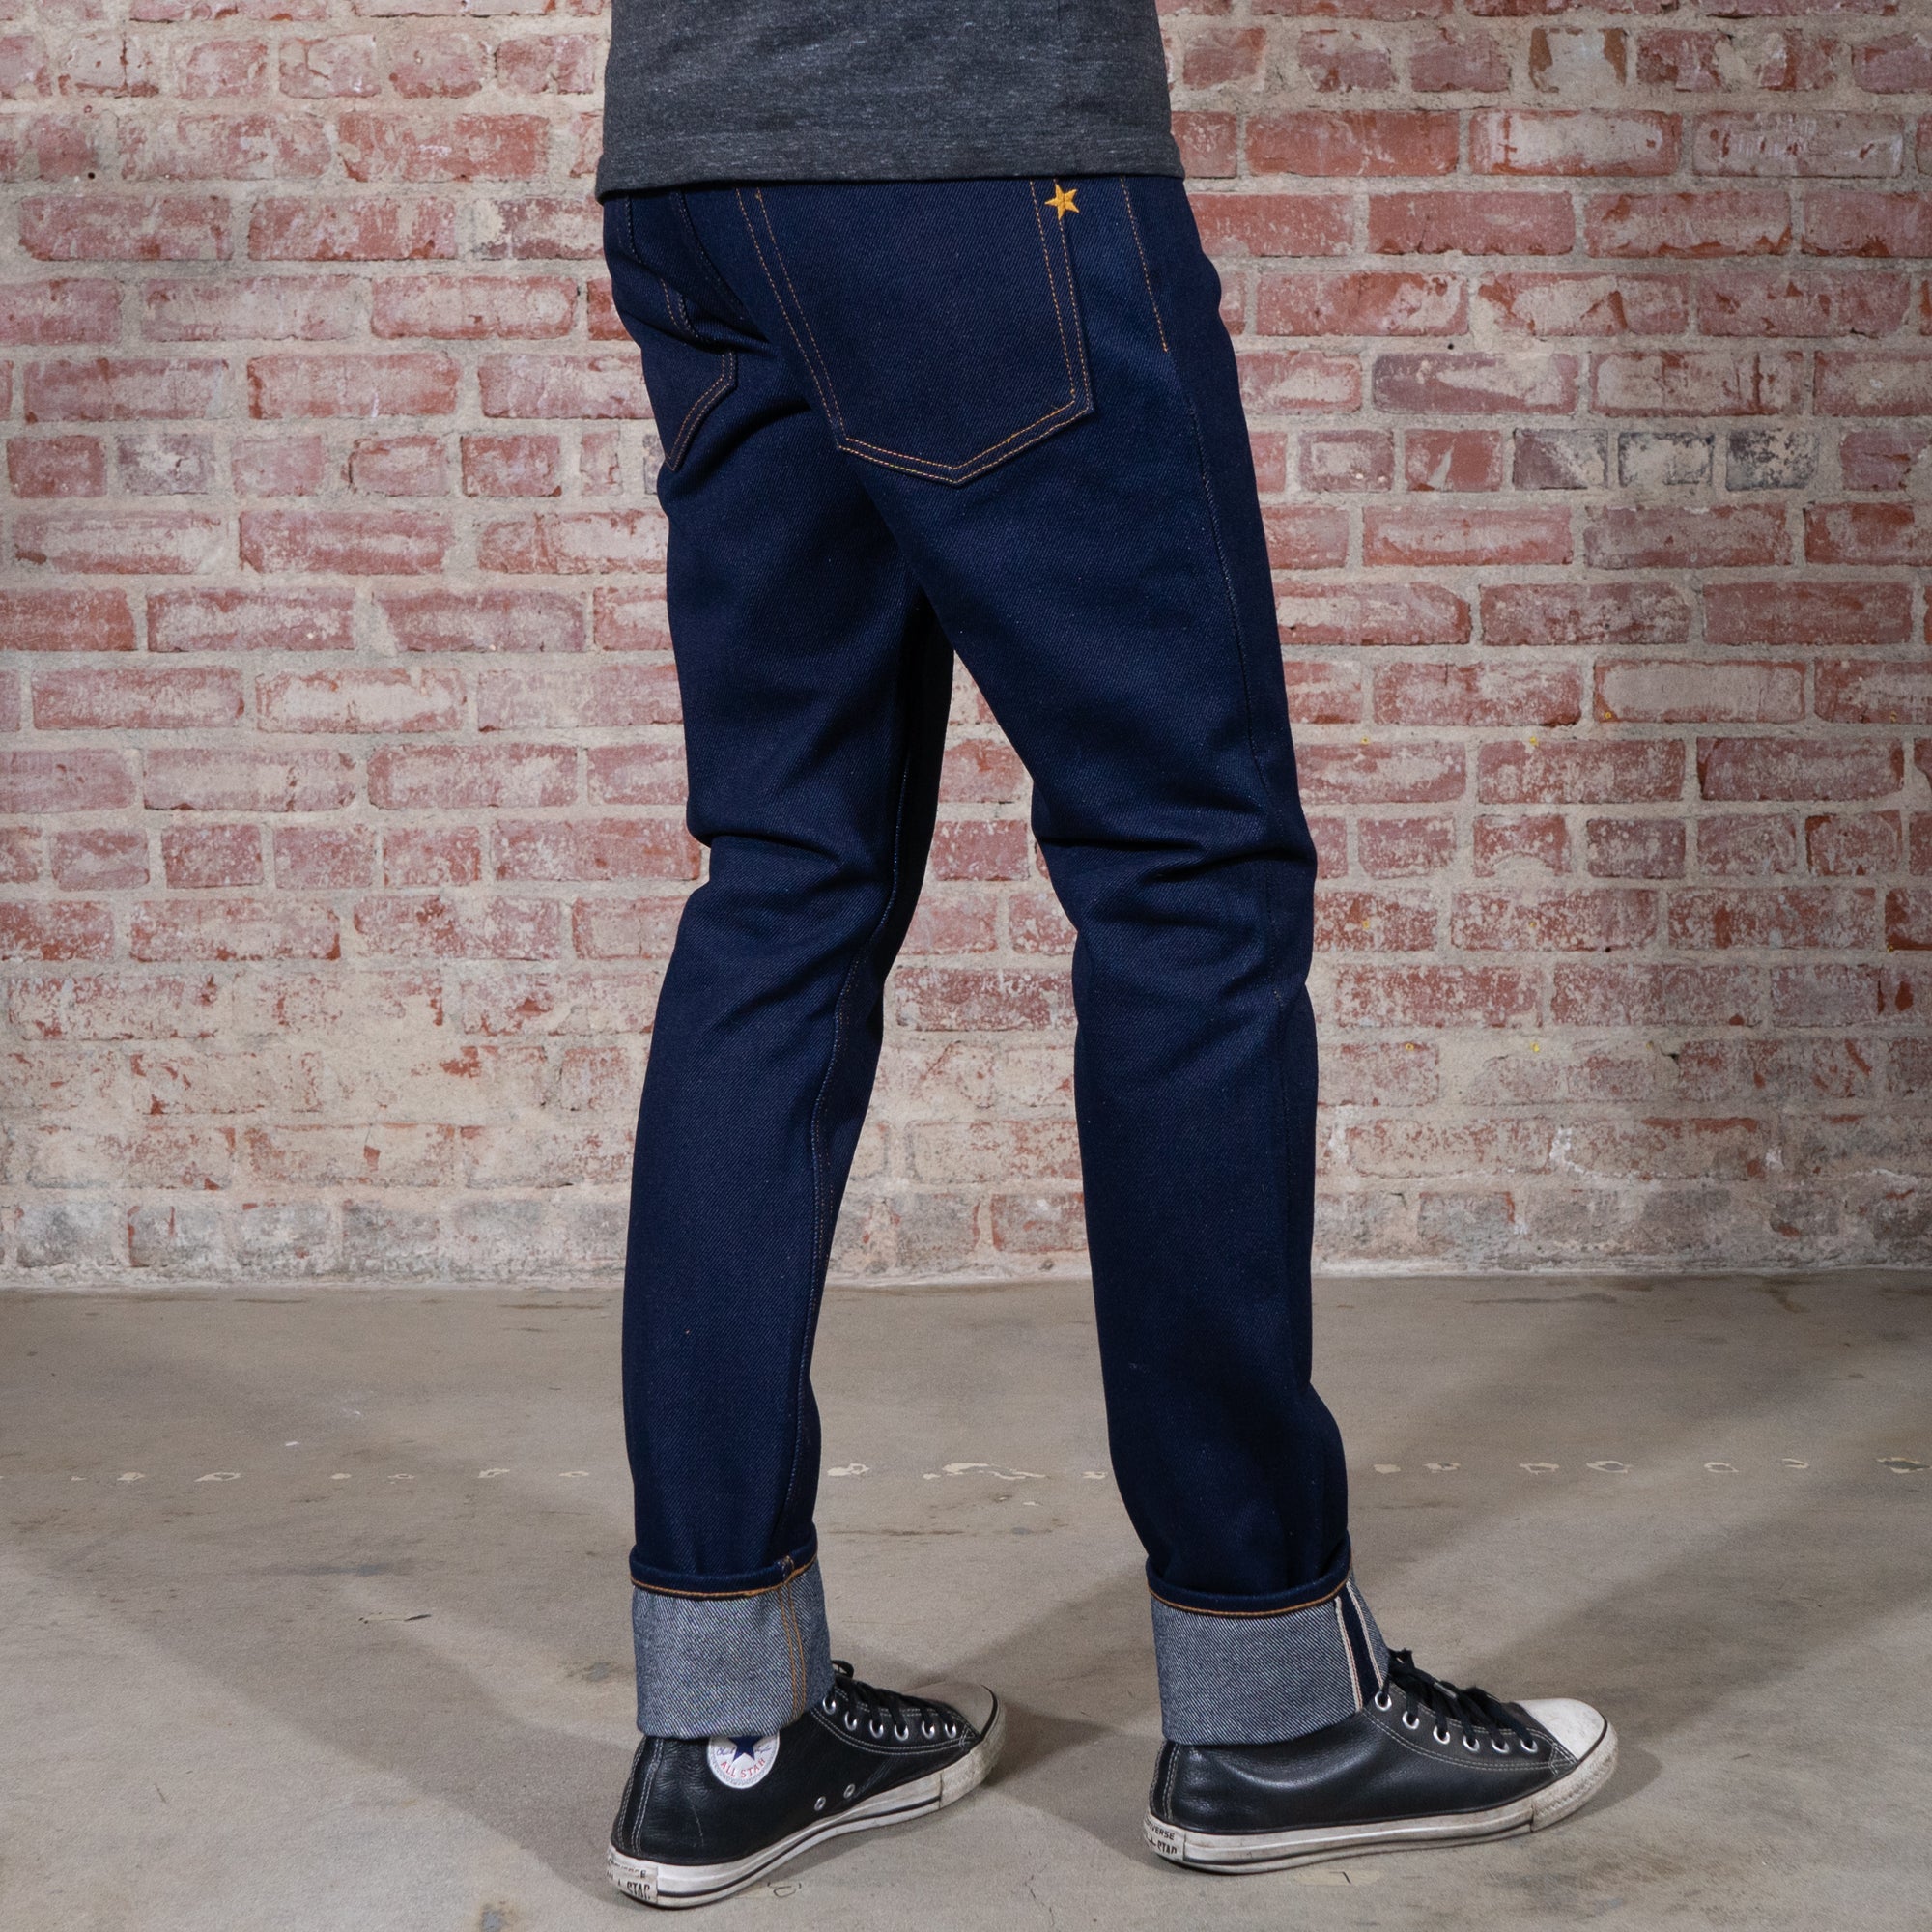 Brave Star Selvage Jeans NEW - Jeans